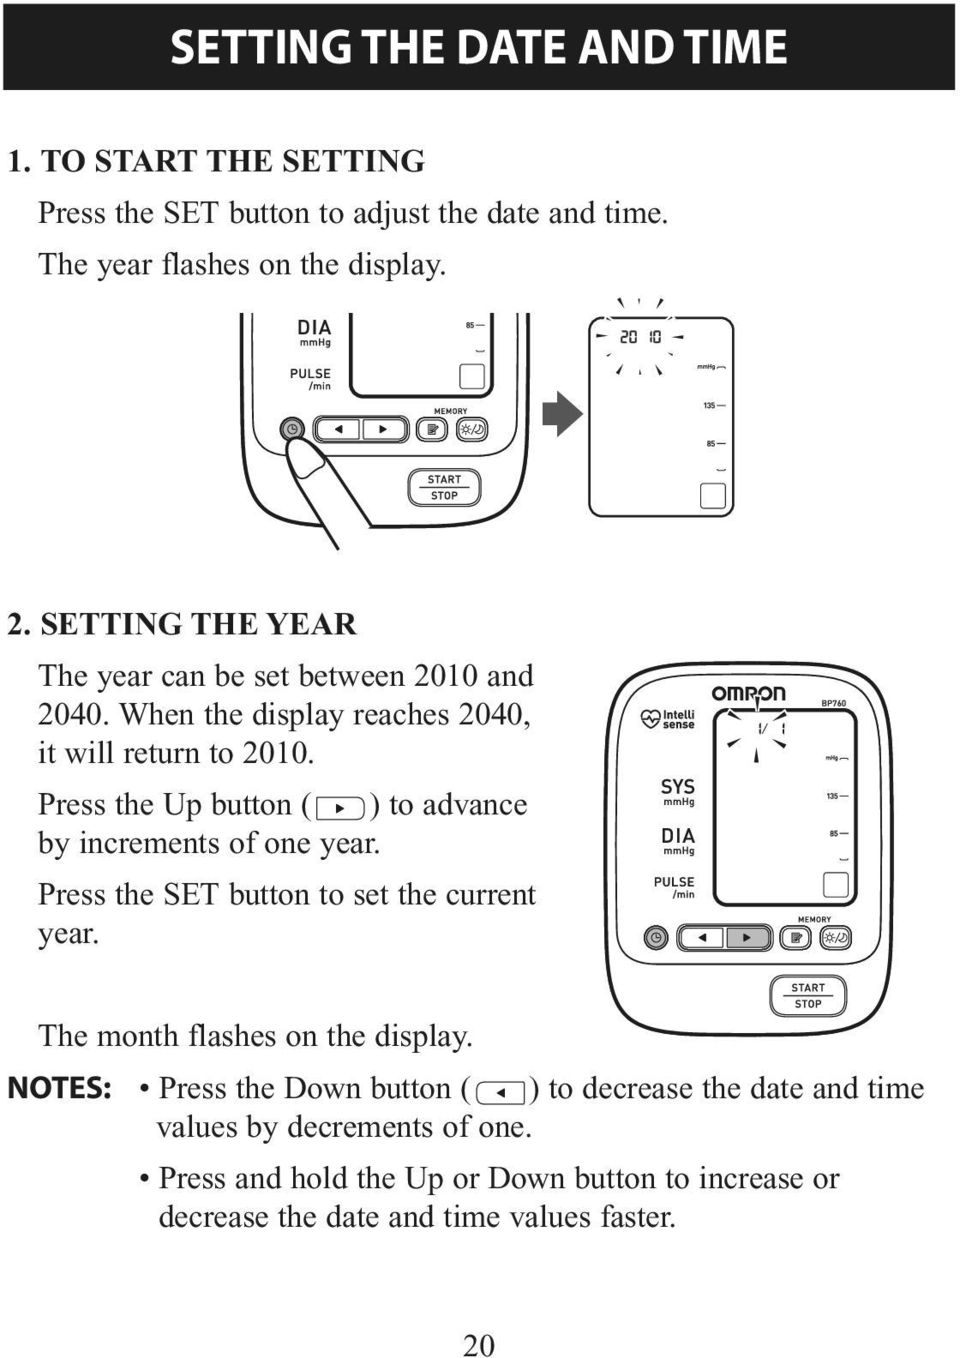 Press the Up button ( ) to advance by increments of one year. Press the SET button to set the current year. The month flashes on the display.